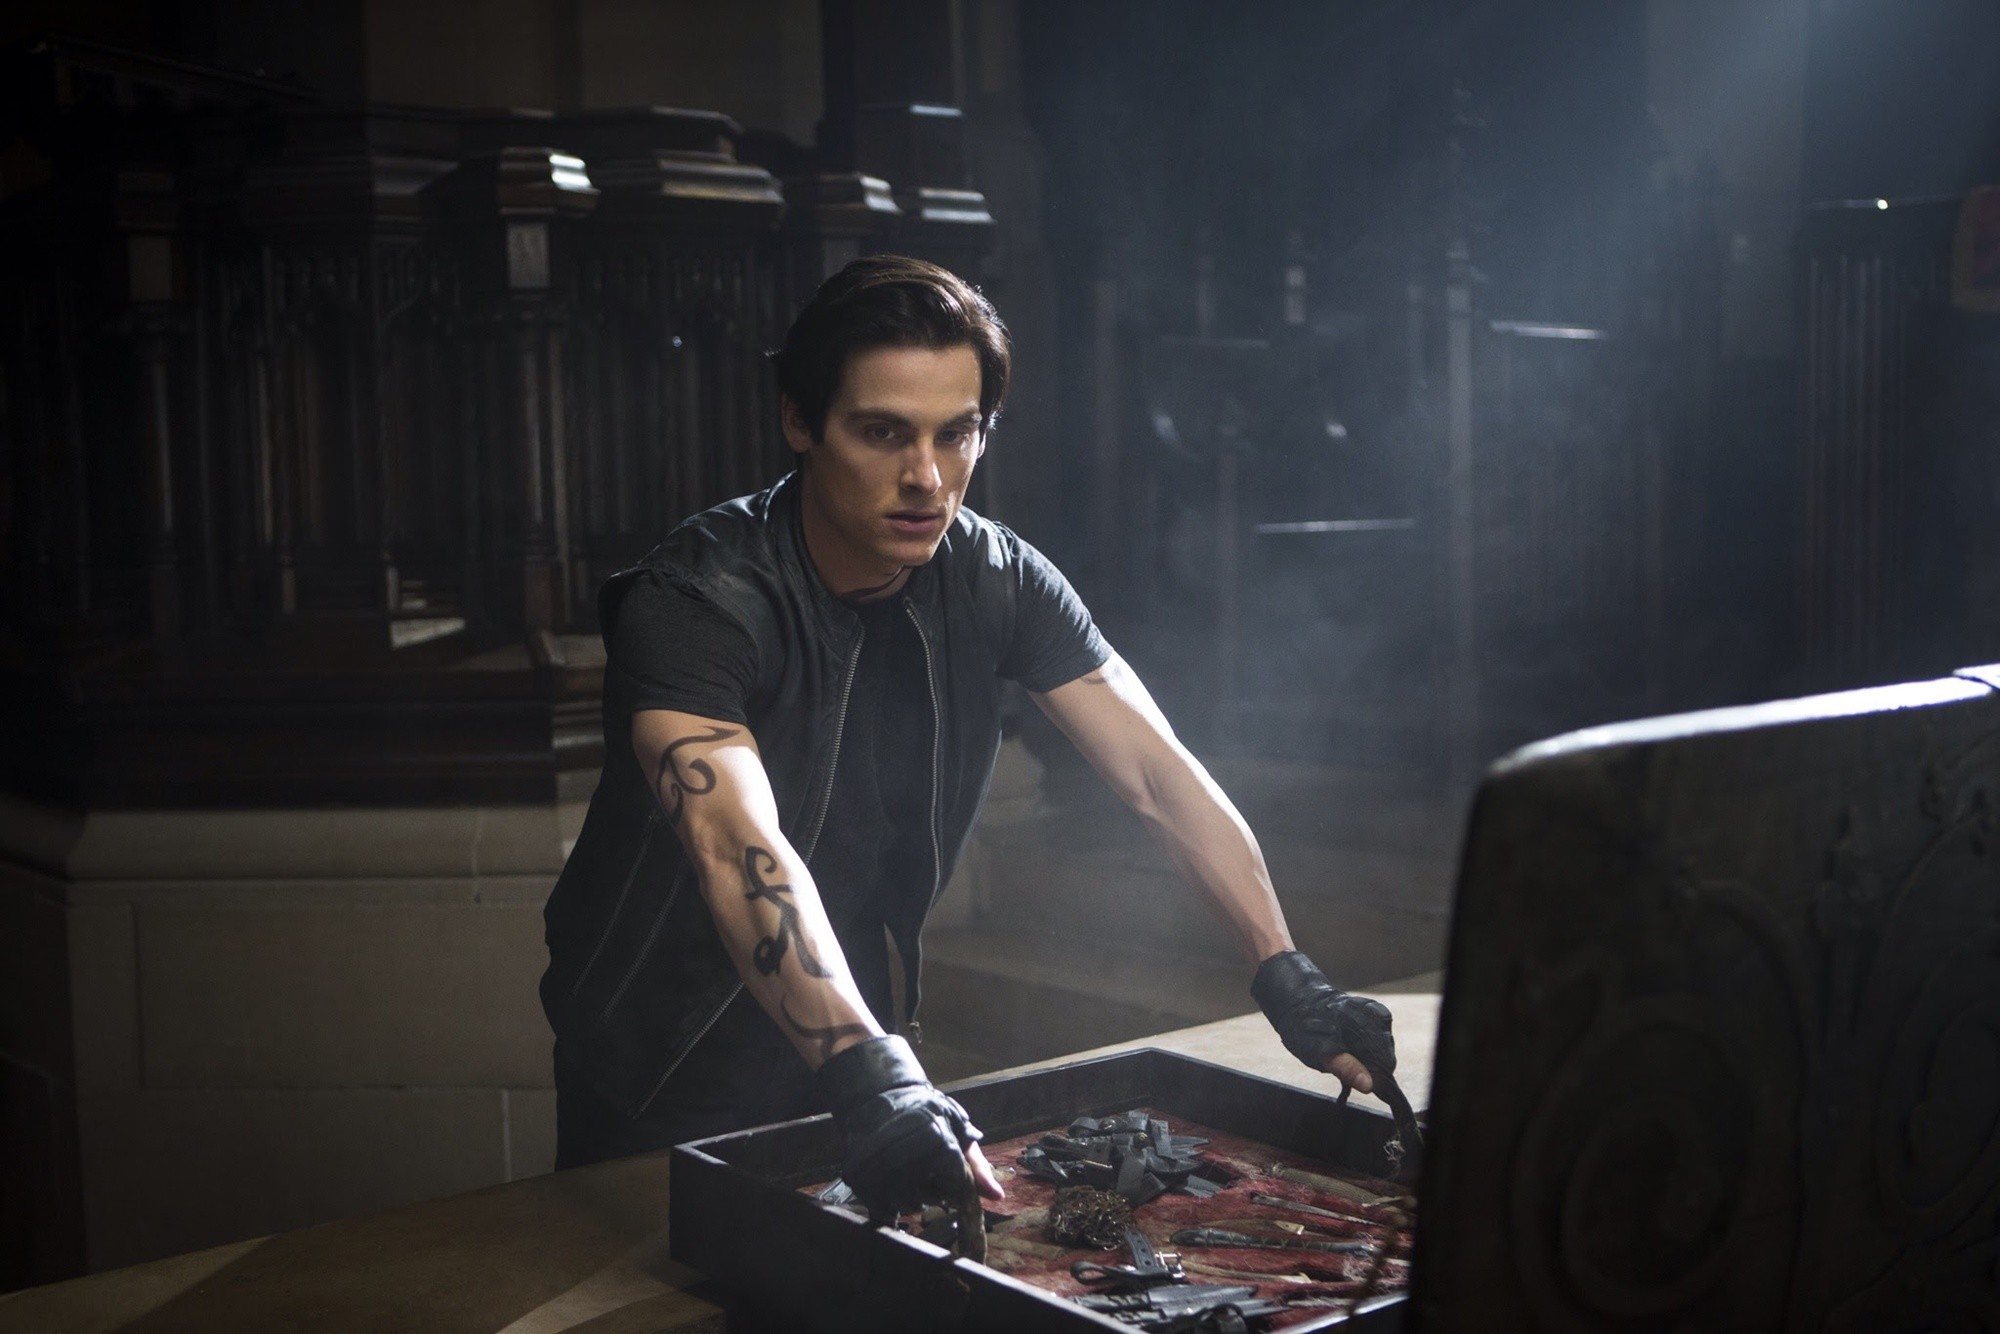 Kevin Zegers stars as Alec Lightwood in Screen Gems' The Mortal Instruments: City of Bones (2013). Photo credit by Rafy.